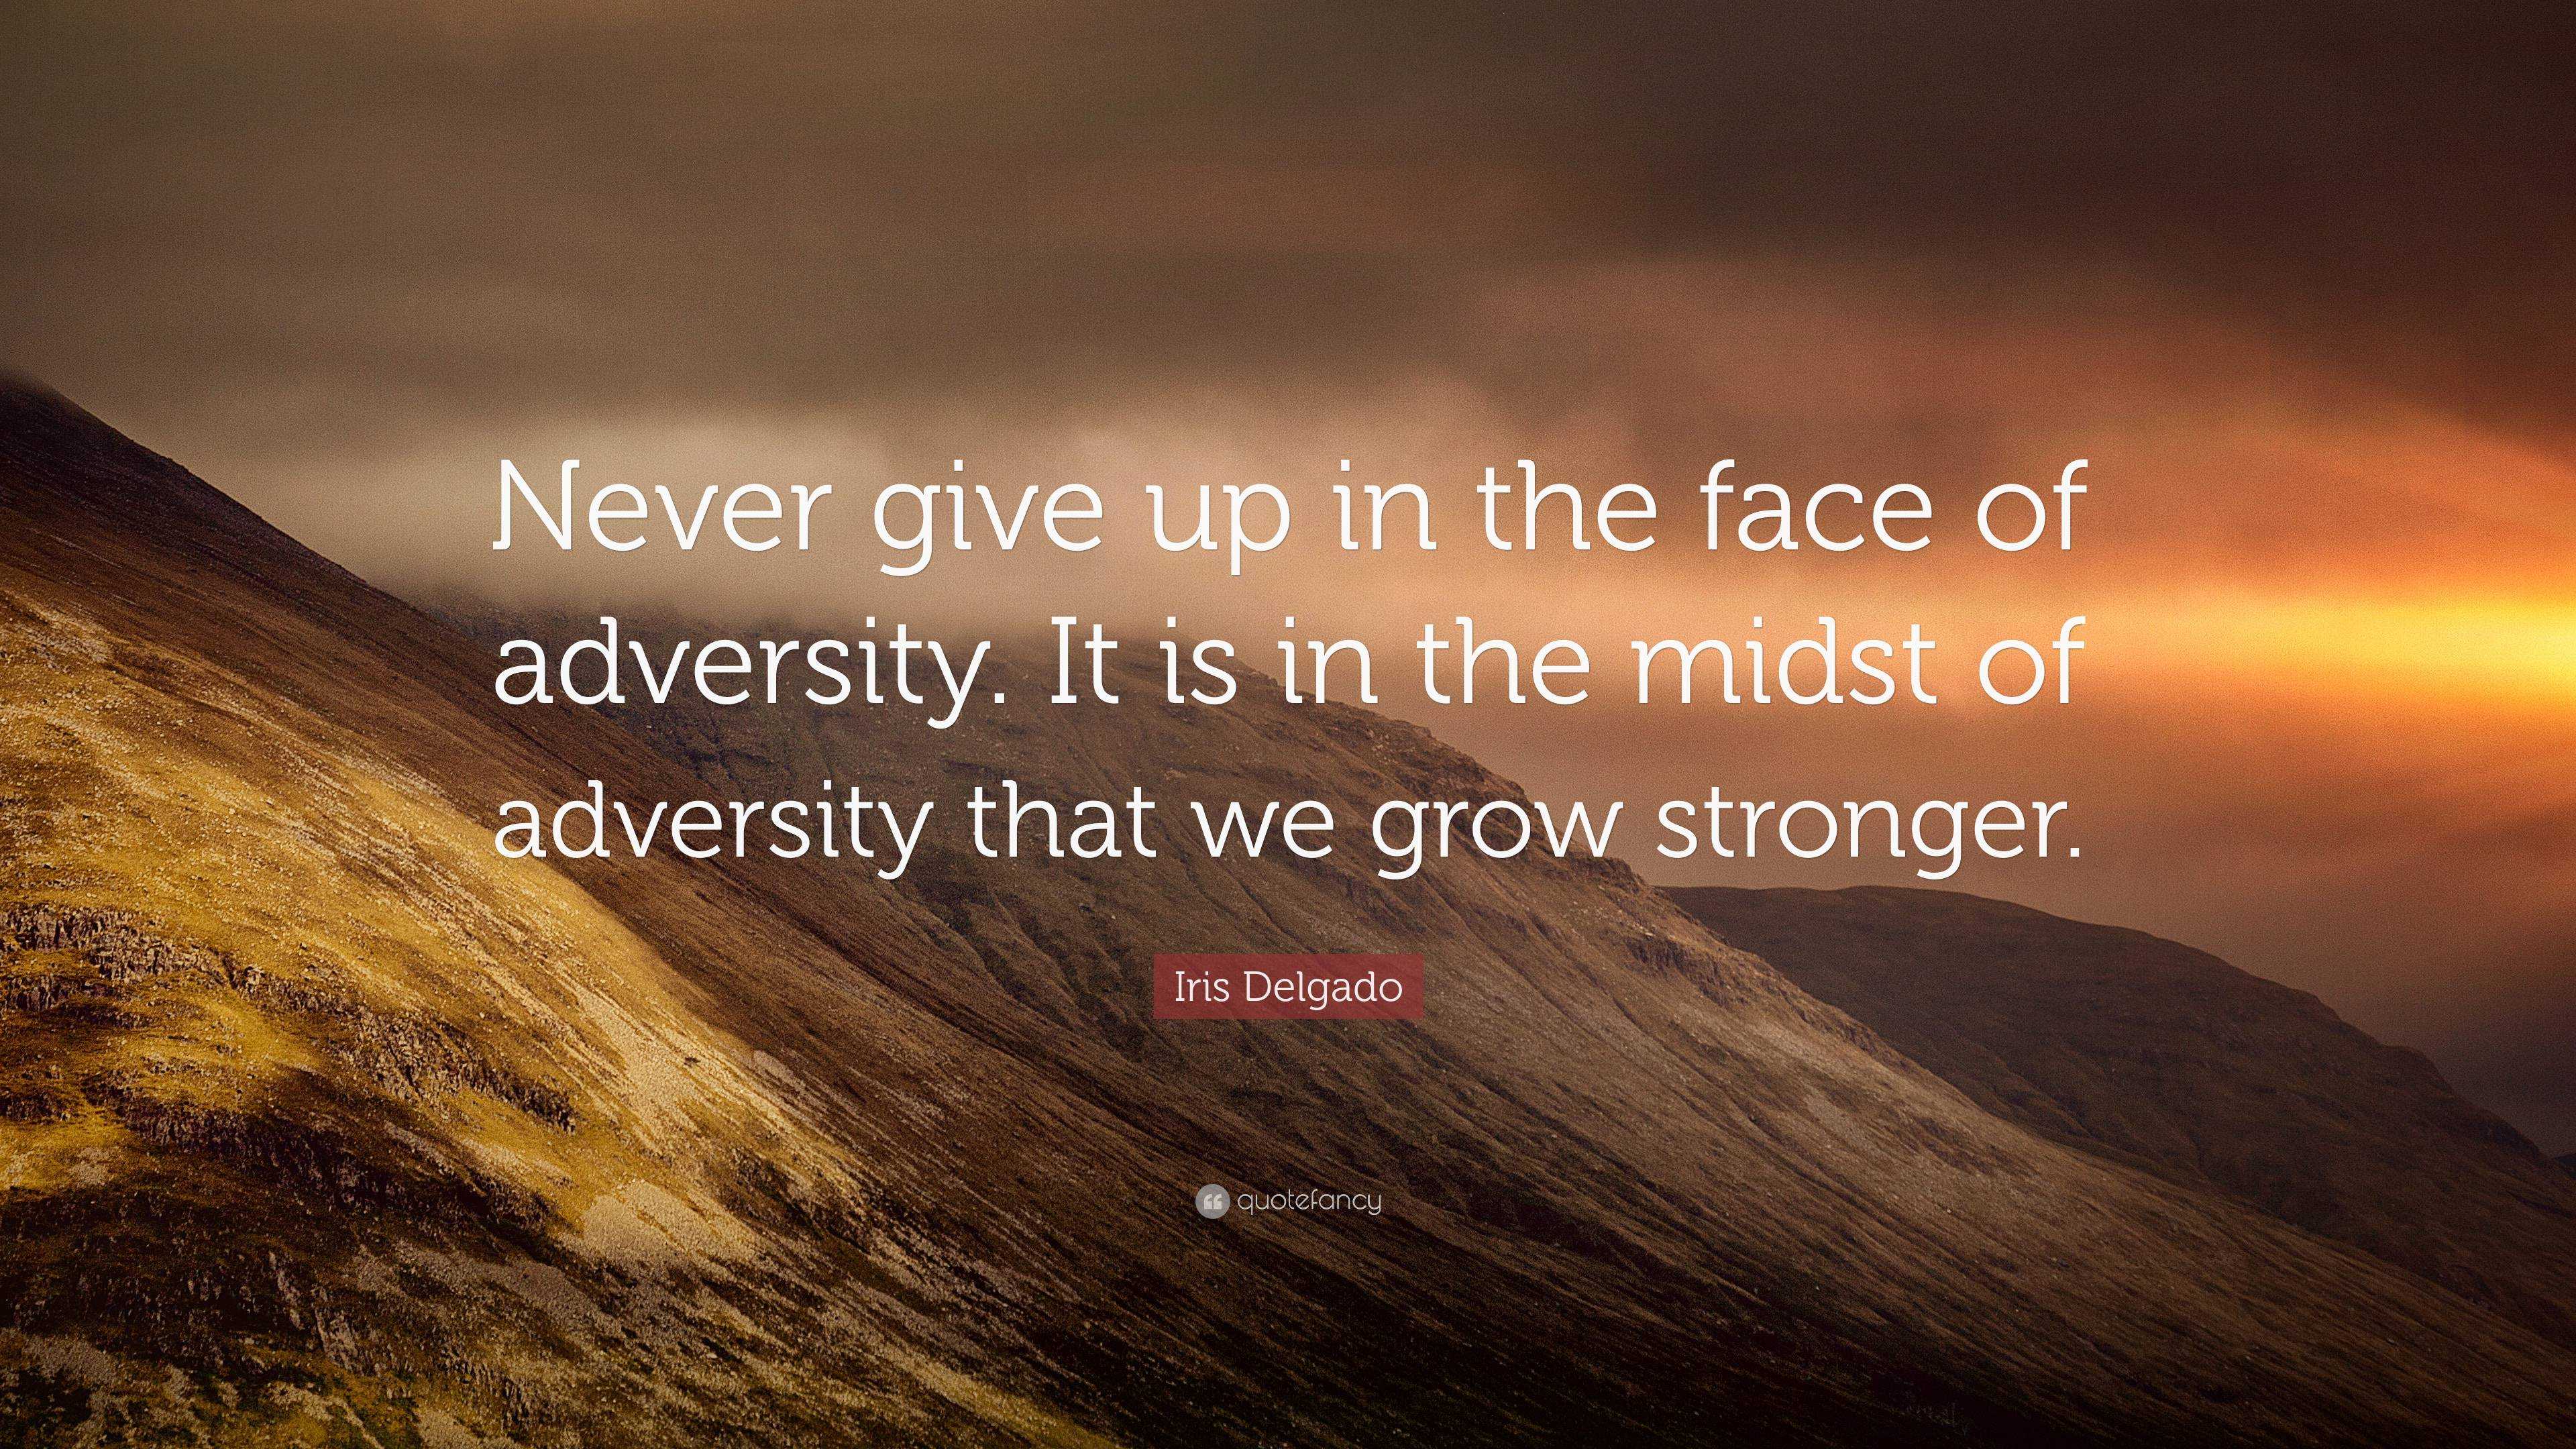 Iris Delgado Quote: “Never give up in the face of adversity. It is in the  midst